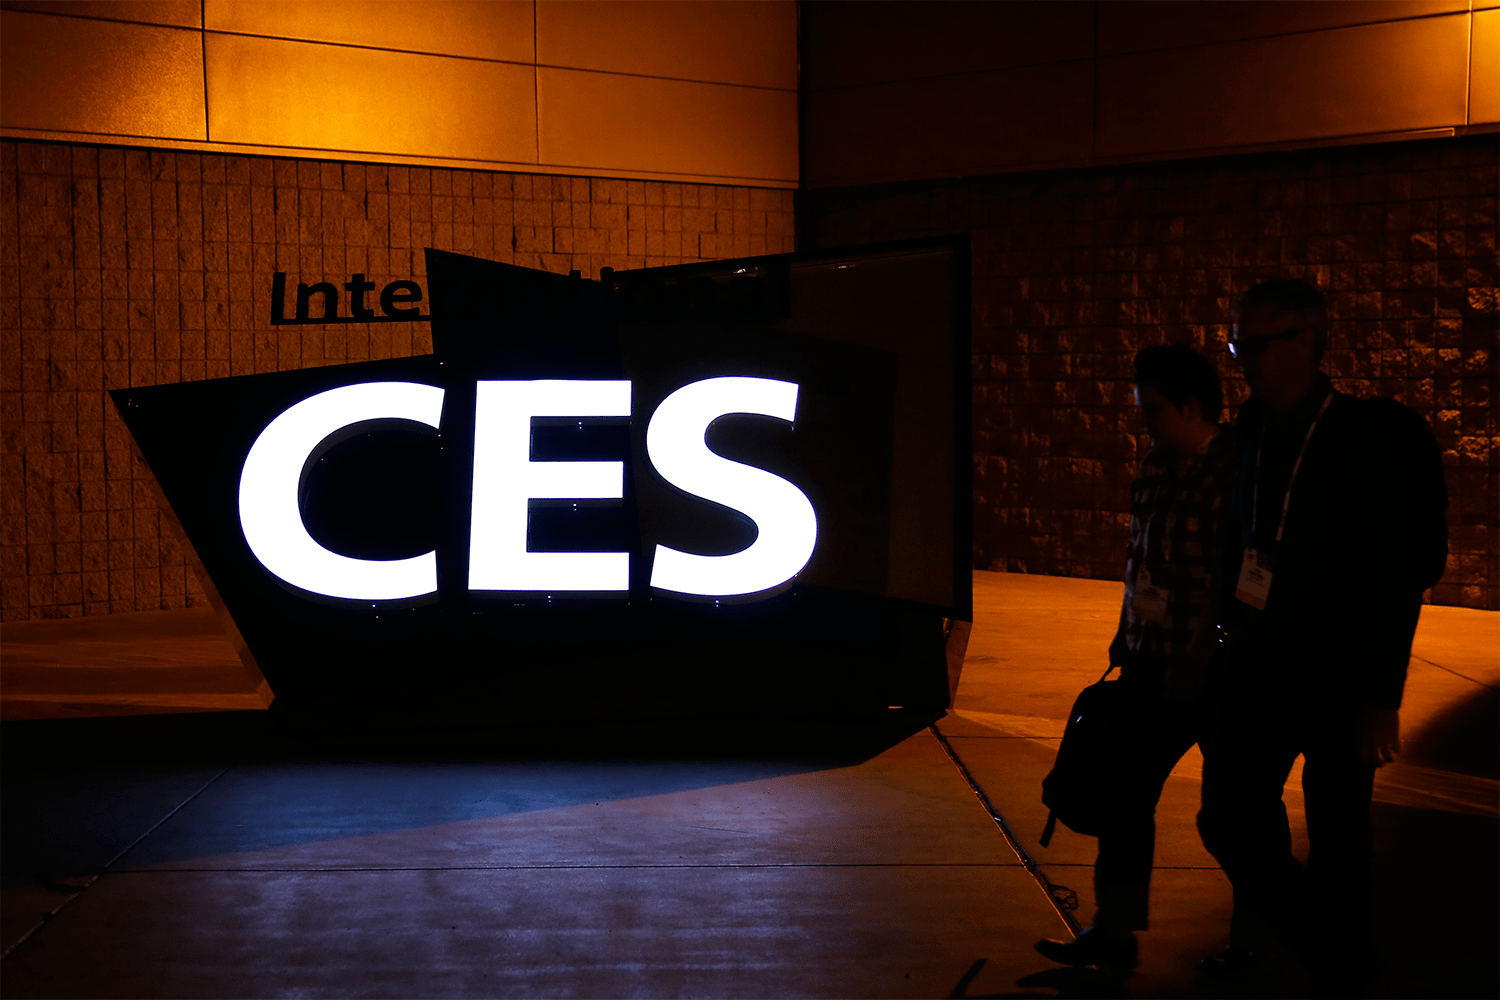 A sign at International CES 2014 in Las Vegas (Bloomberg / Getty Images)